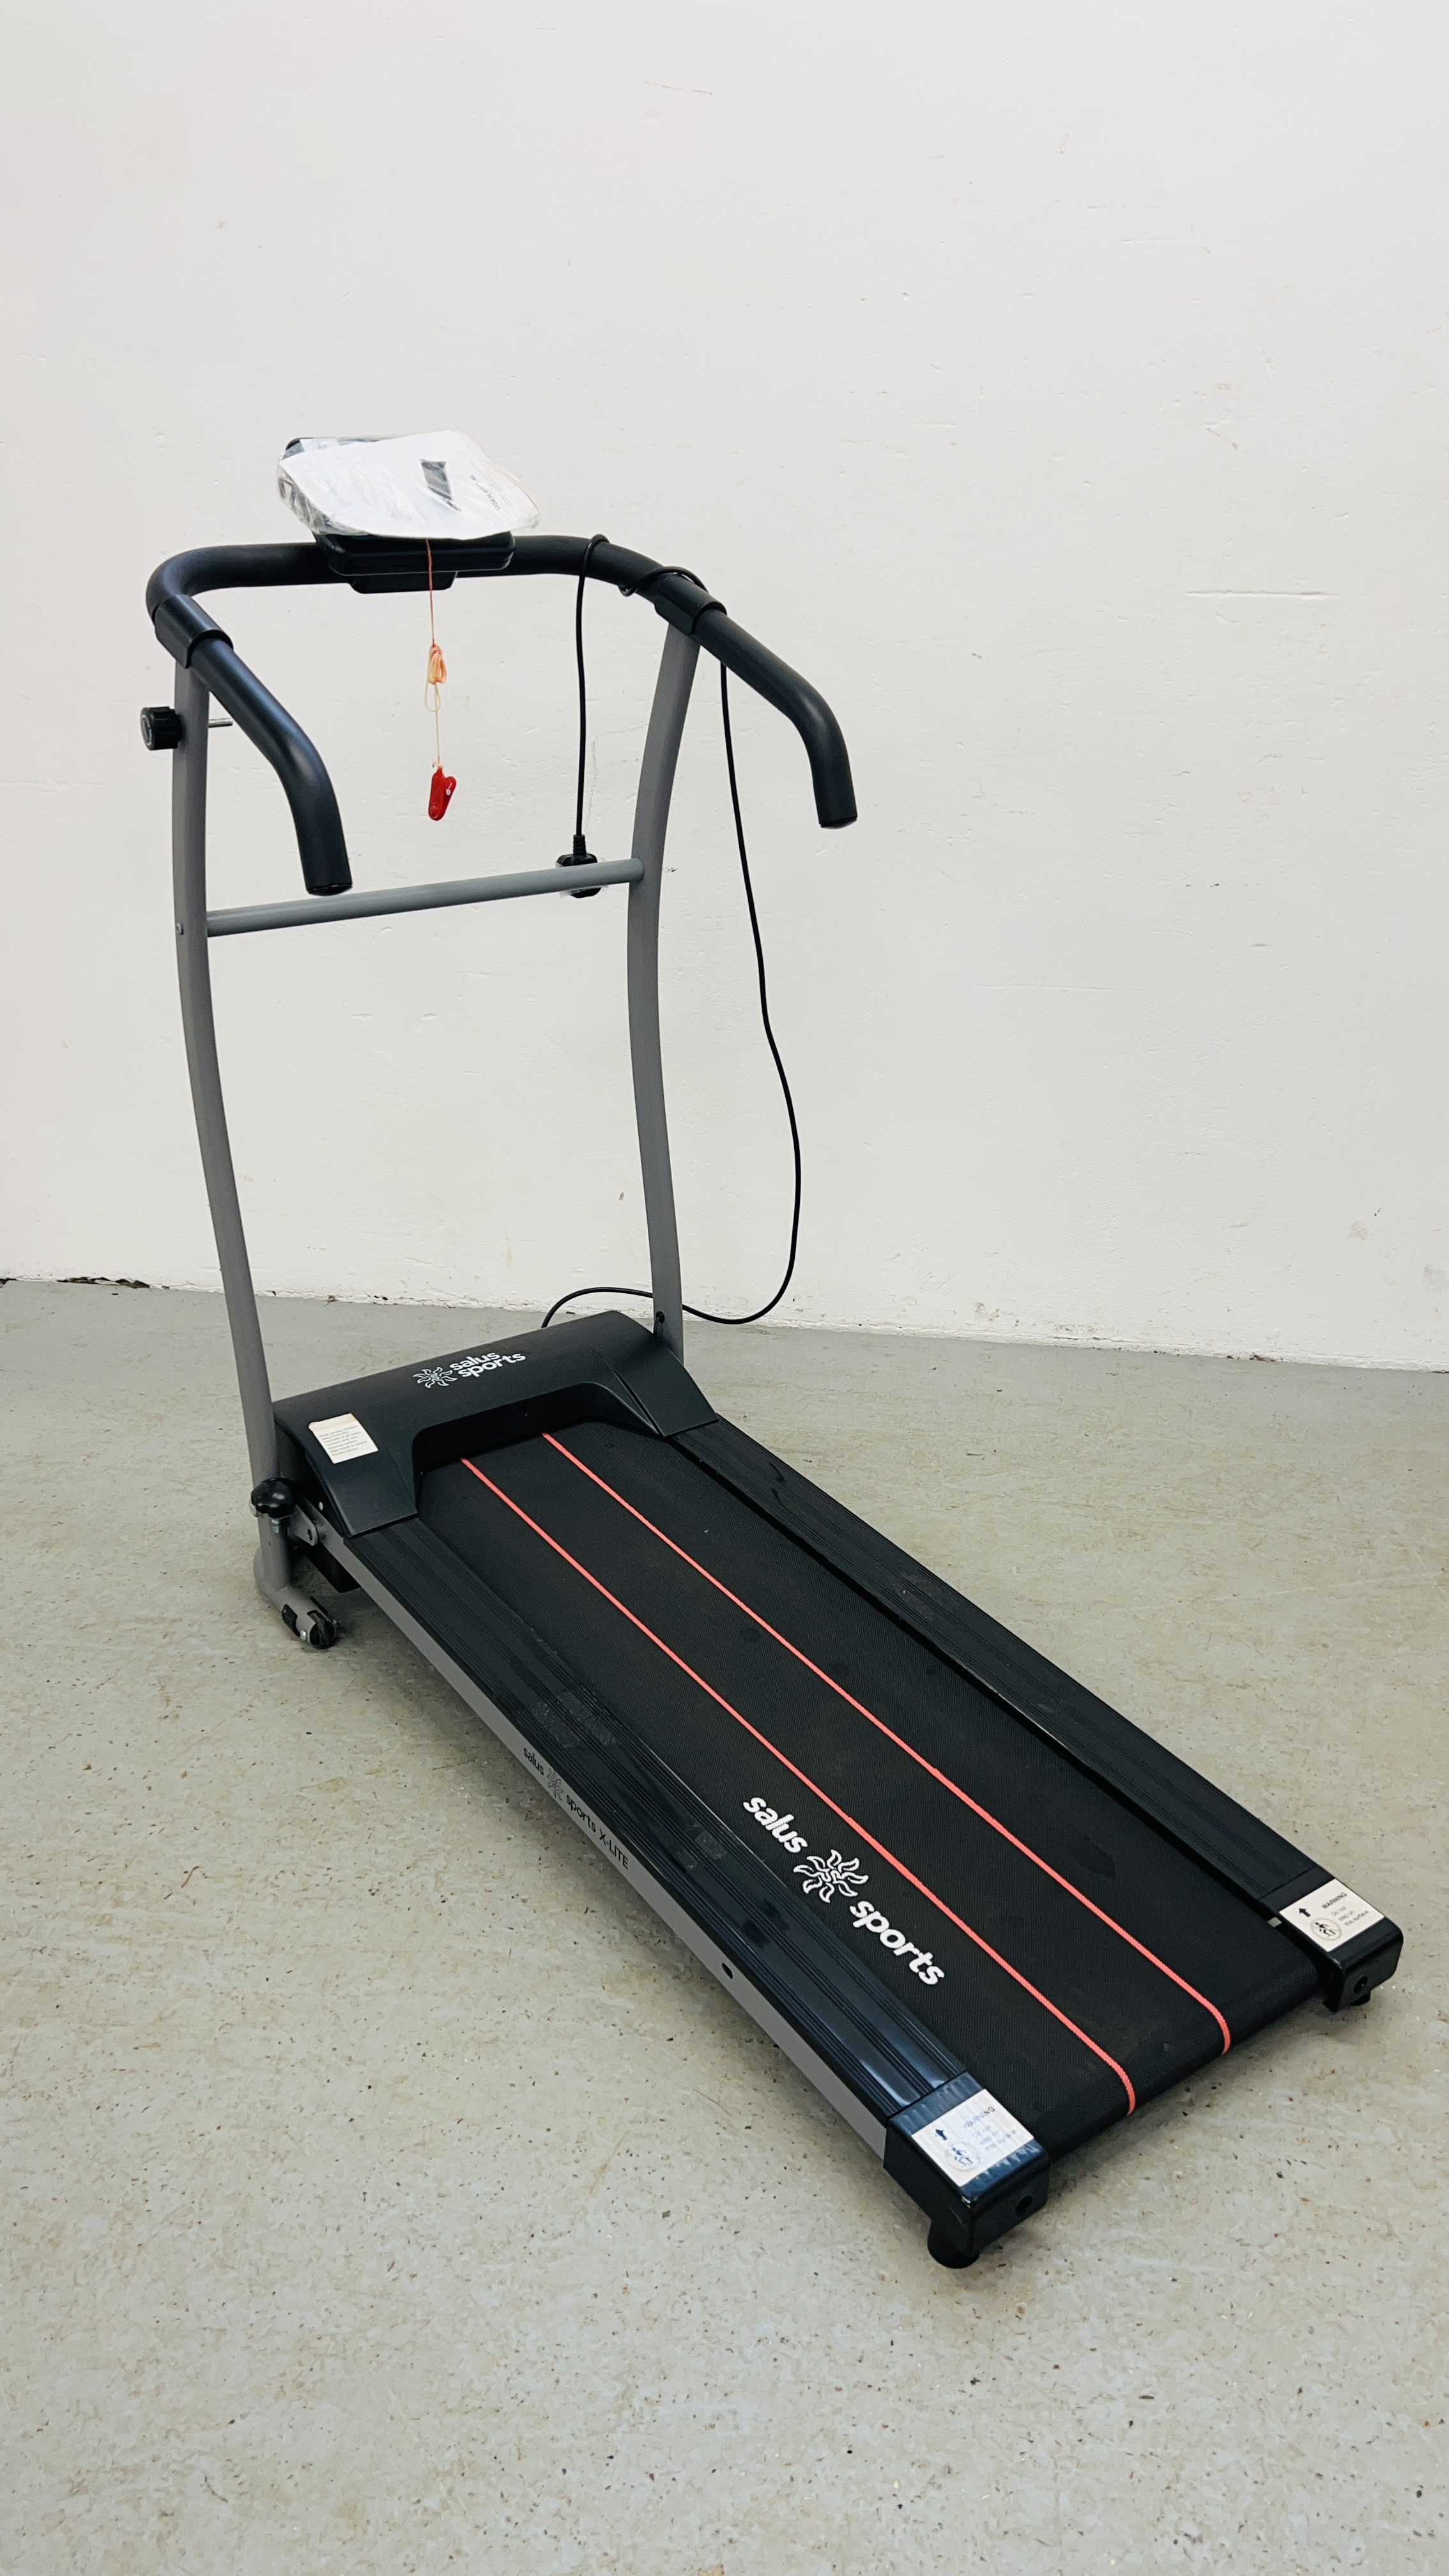 SALUS SPORTS TREADMILL X-LITE SERIES COMPLETE WITH INSTRUCTIONS - SOLD AS SEEN